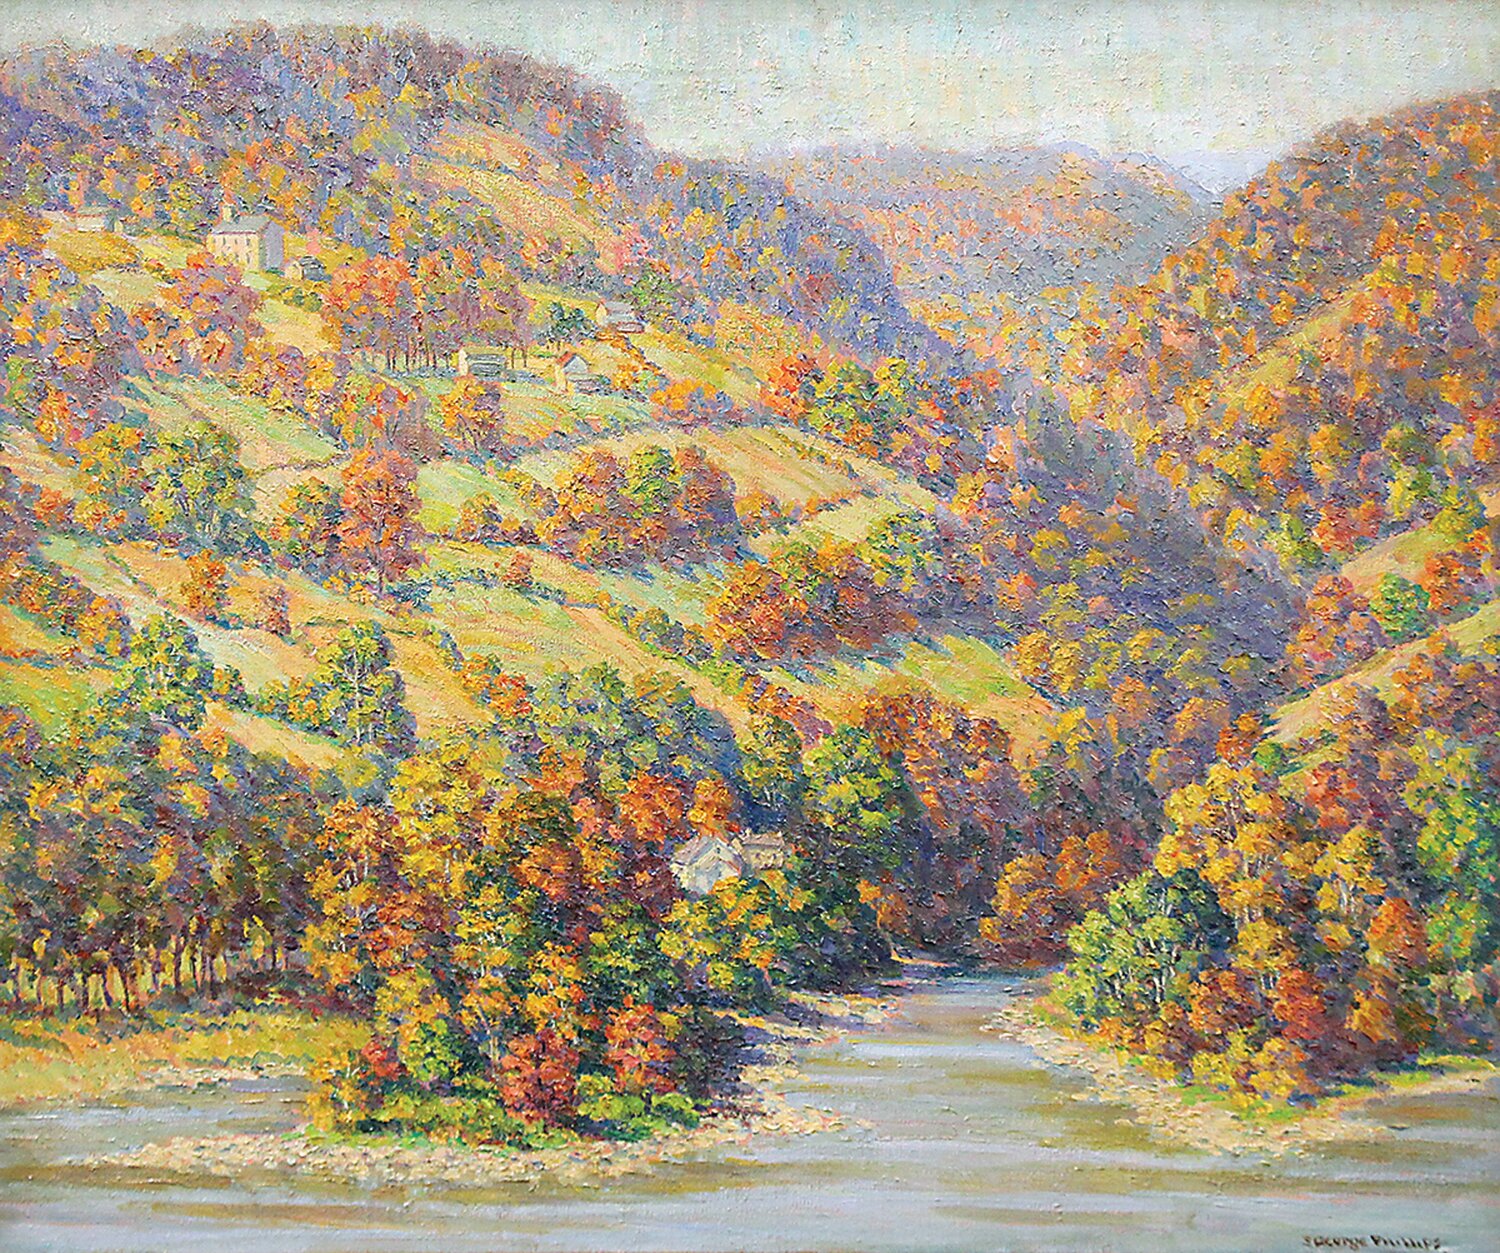 “Point Pleasant Fall” is a framed and signed oil on canvas by American artist S. George Phillips (1890 - 1965).